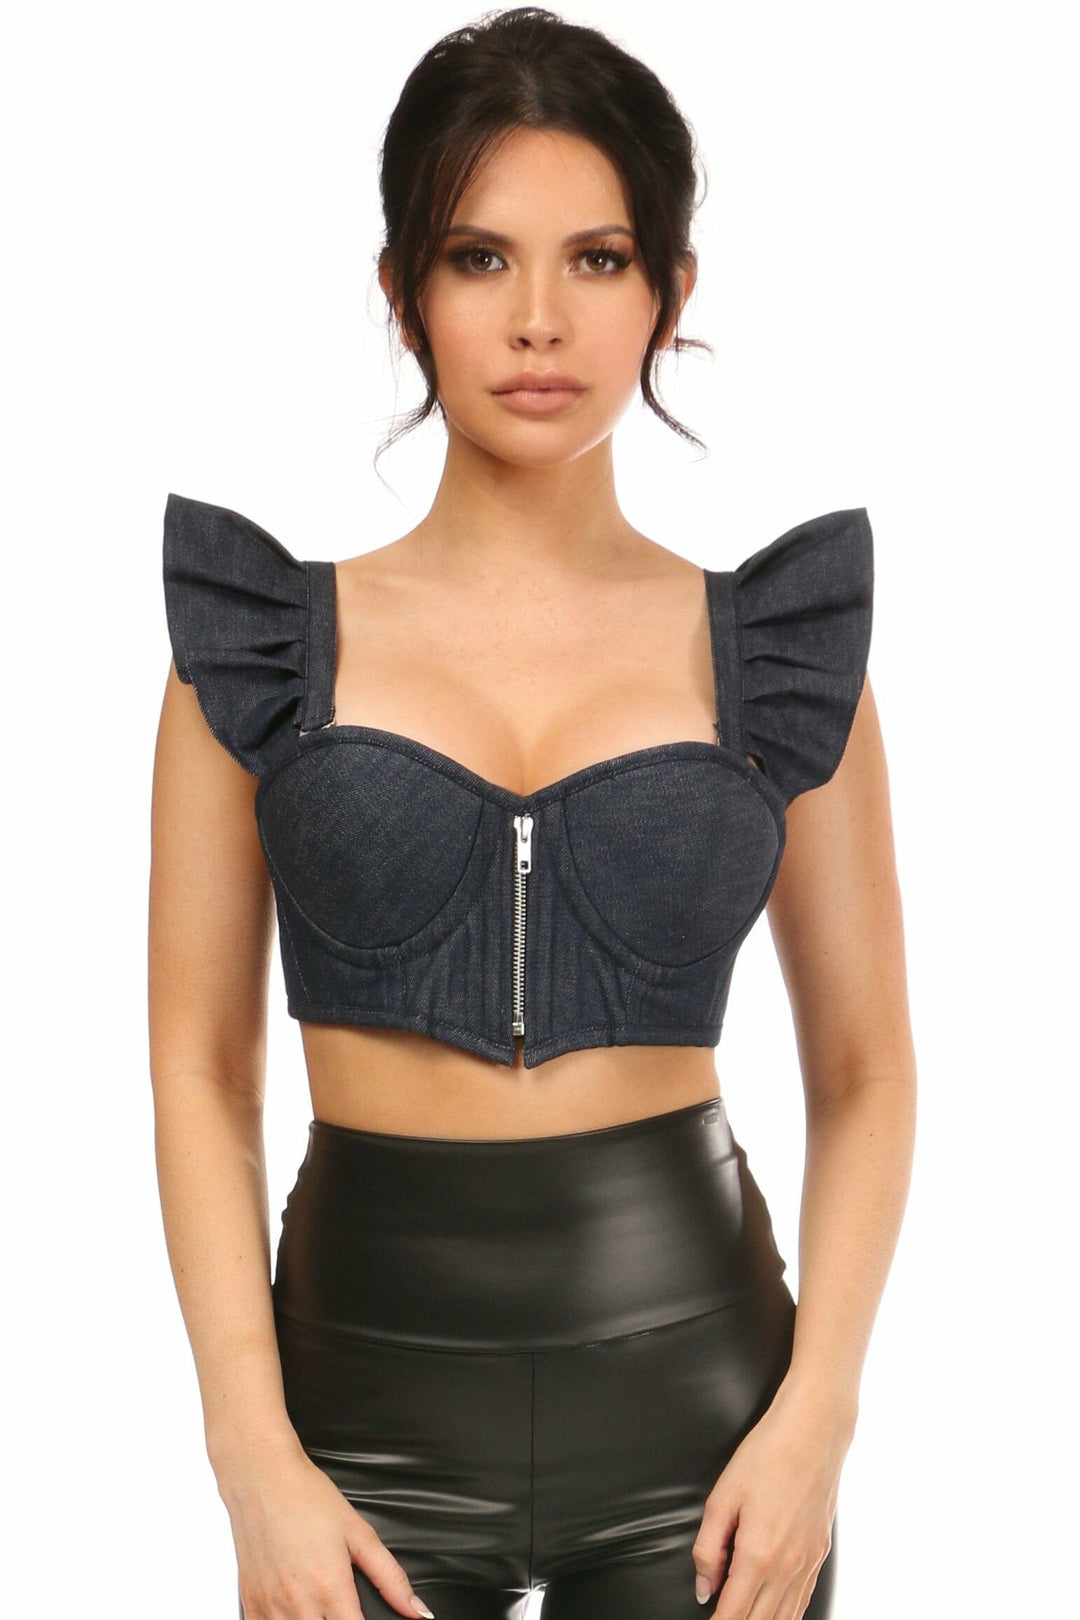 Lavish Blue Denim Underwire Bustier Top w/Removable Ruffle Sleeves-Bustier Tops-Daisy Corsets-Blue-S-SEXYSHOES.COM